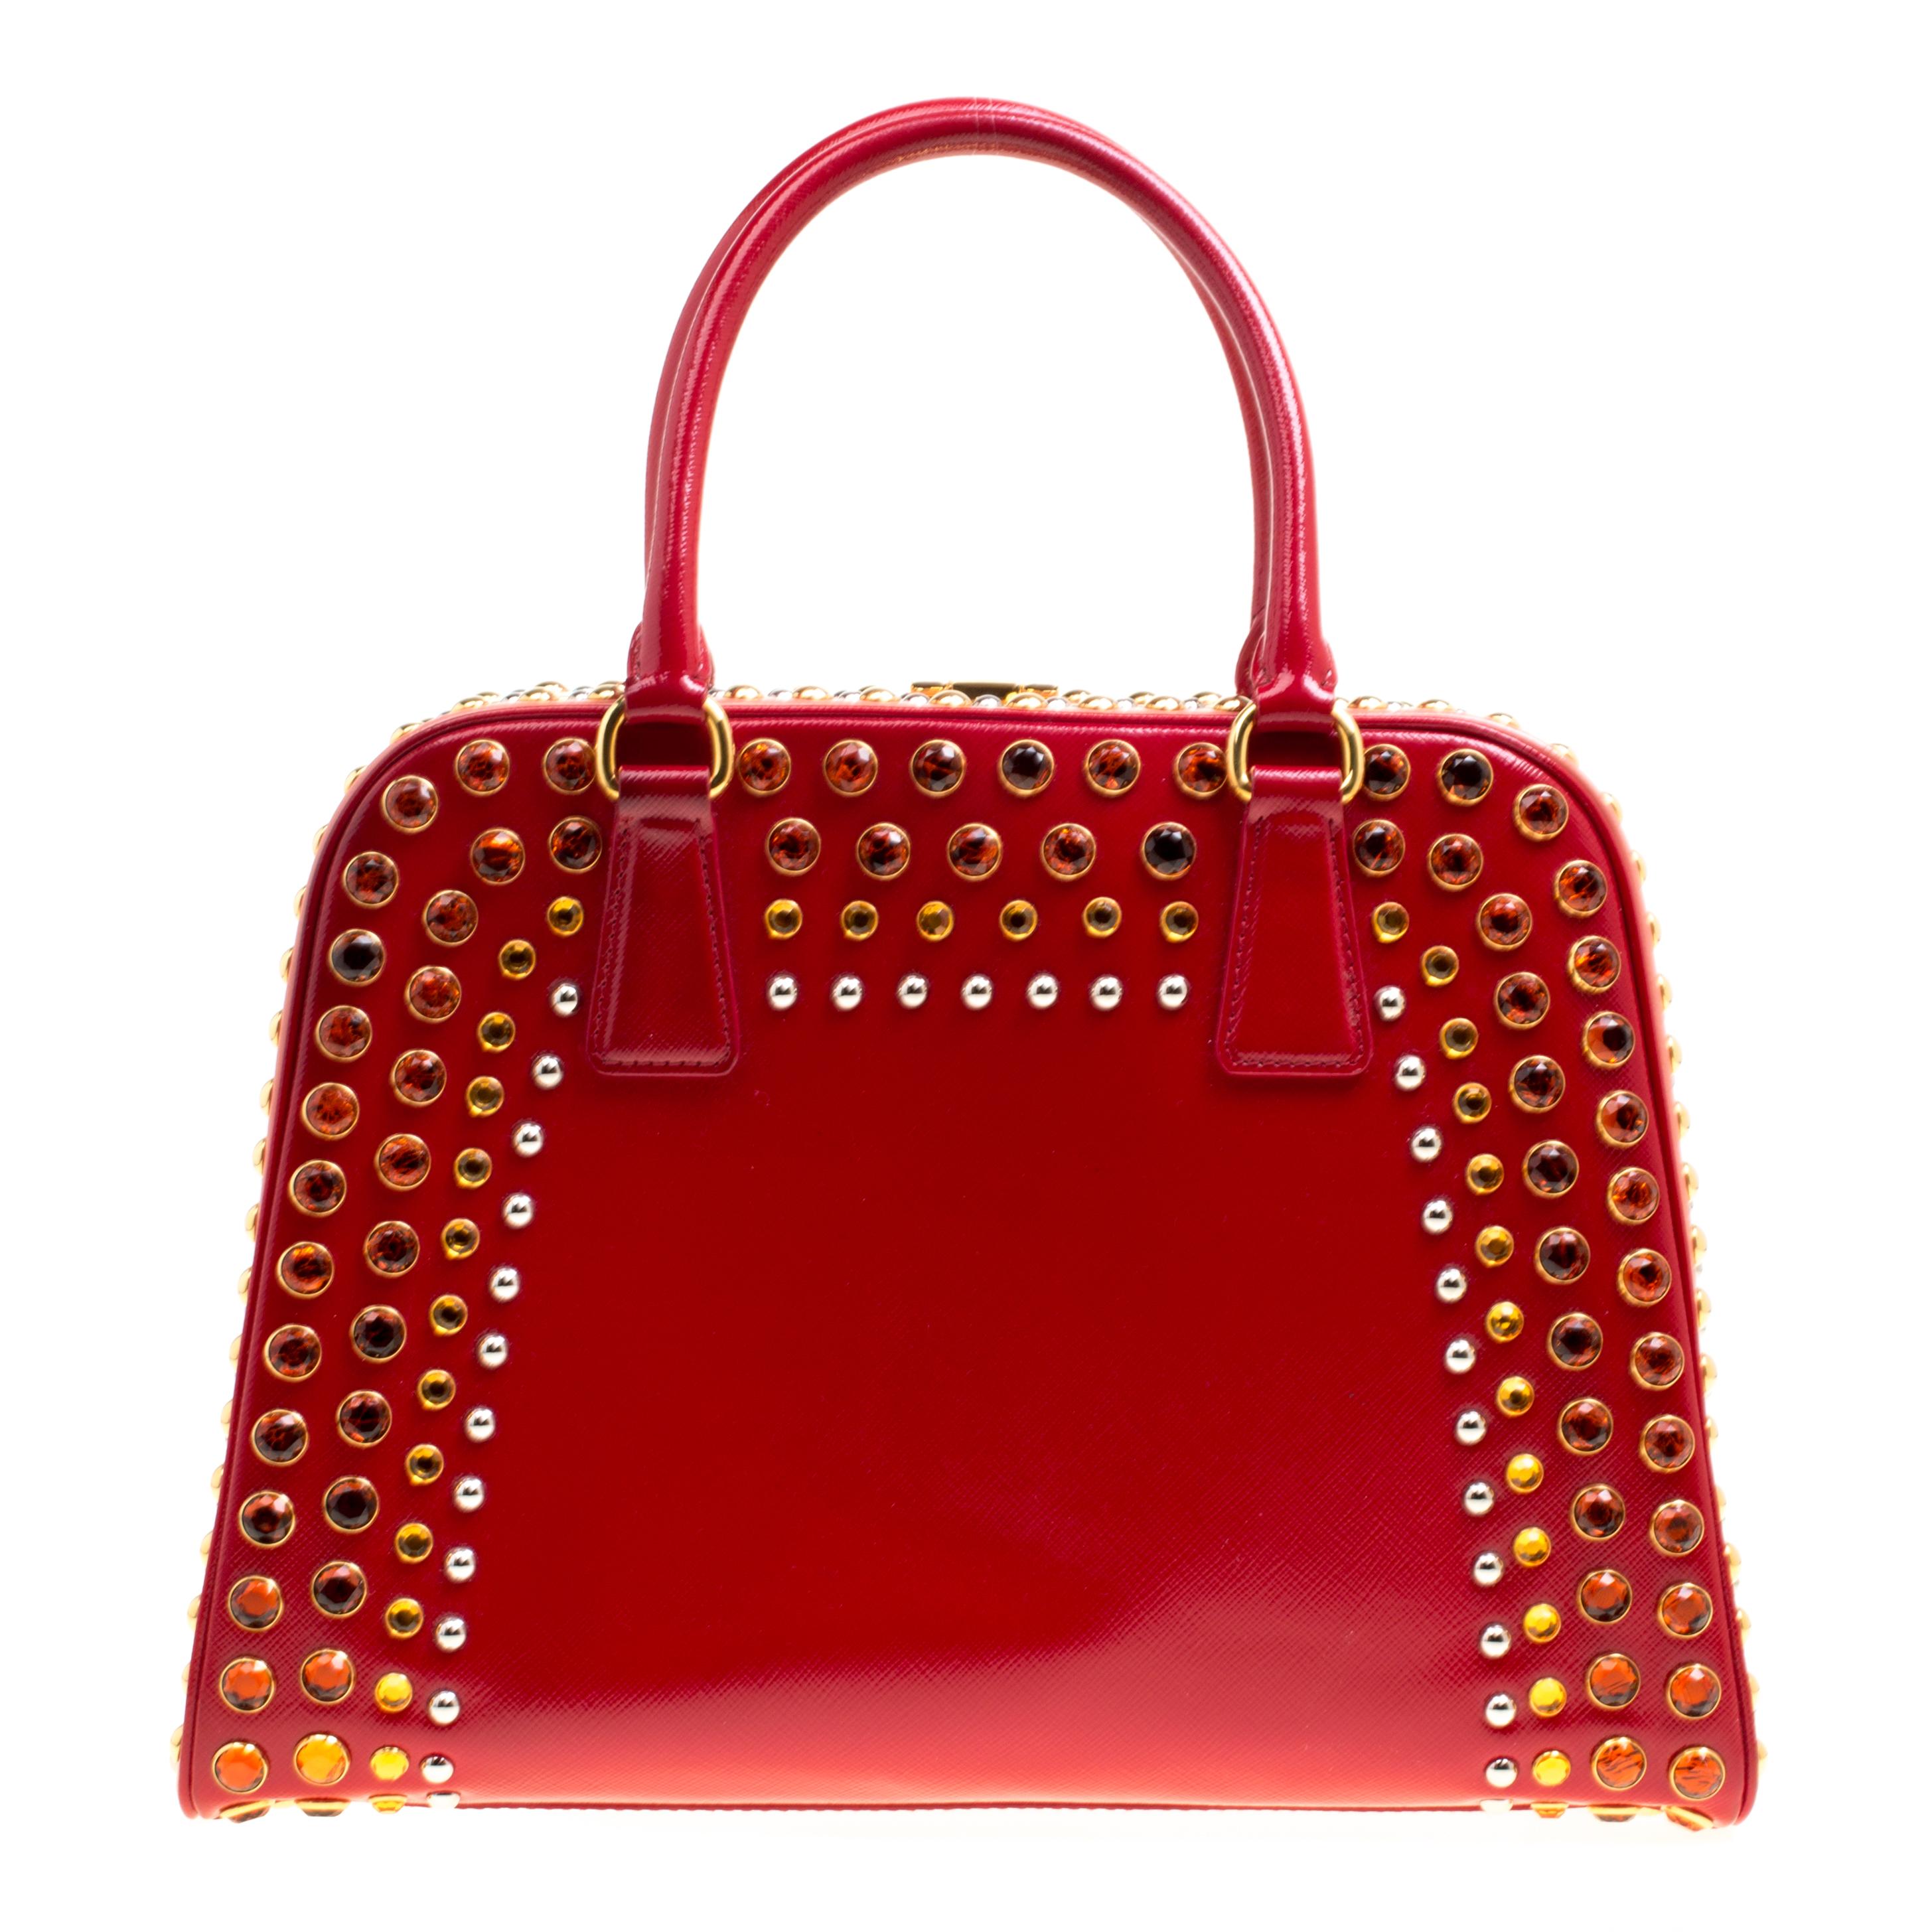 This marvelously designed top handle bag from Prada is the epitome of charm and style. Everything about the bag speaks opulence and a glamorous finish. Sculpted in a pyramid frame style, the bag is crafted from shiny red patent leather with